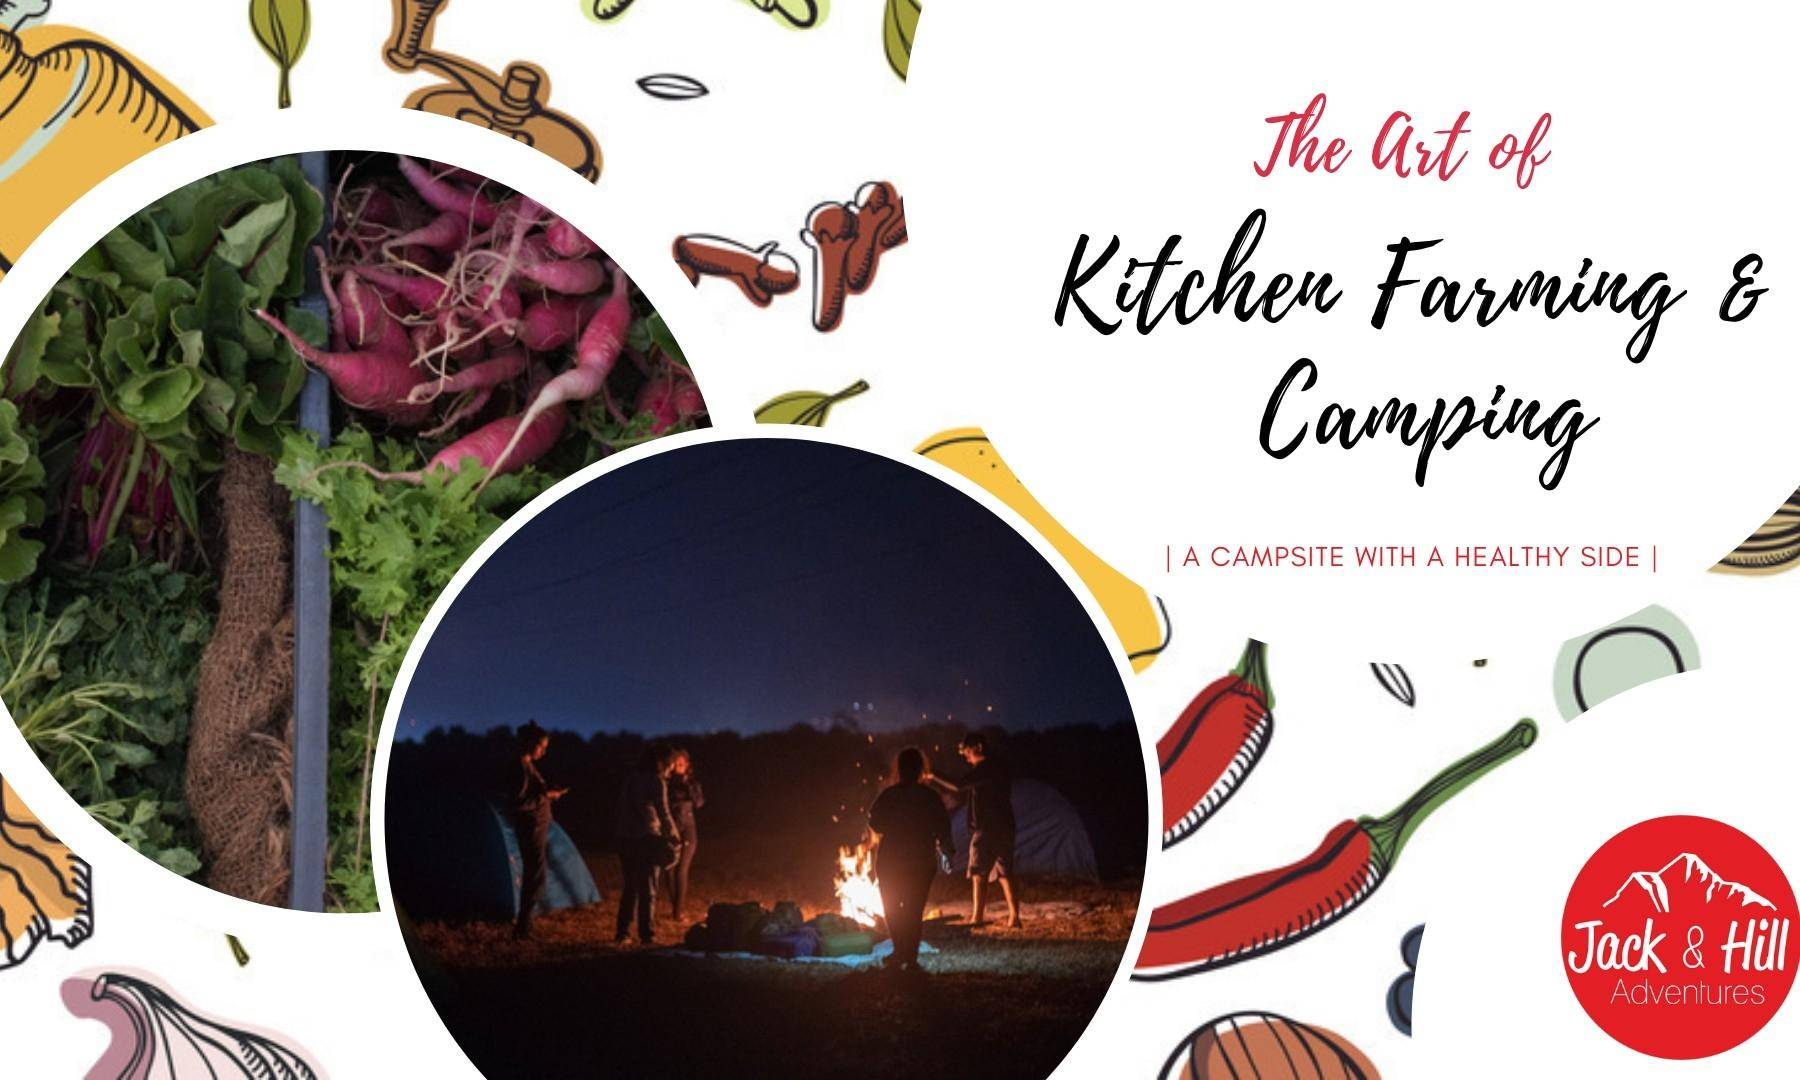 The Art of Kitchen Farming & Camping: Reduce, Reuse, Regrow.